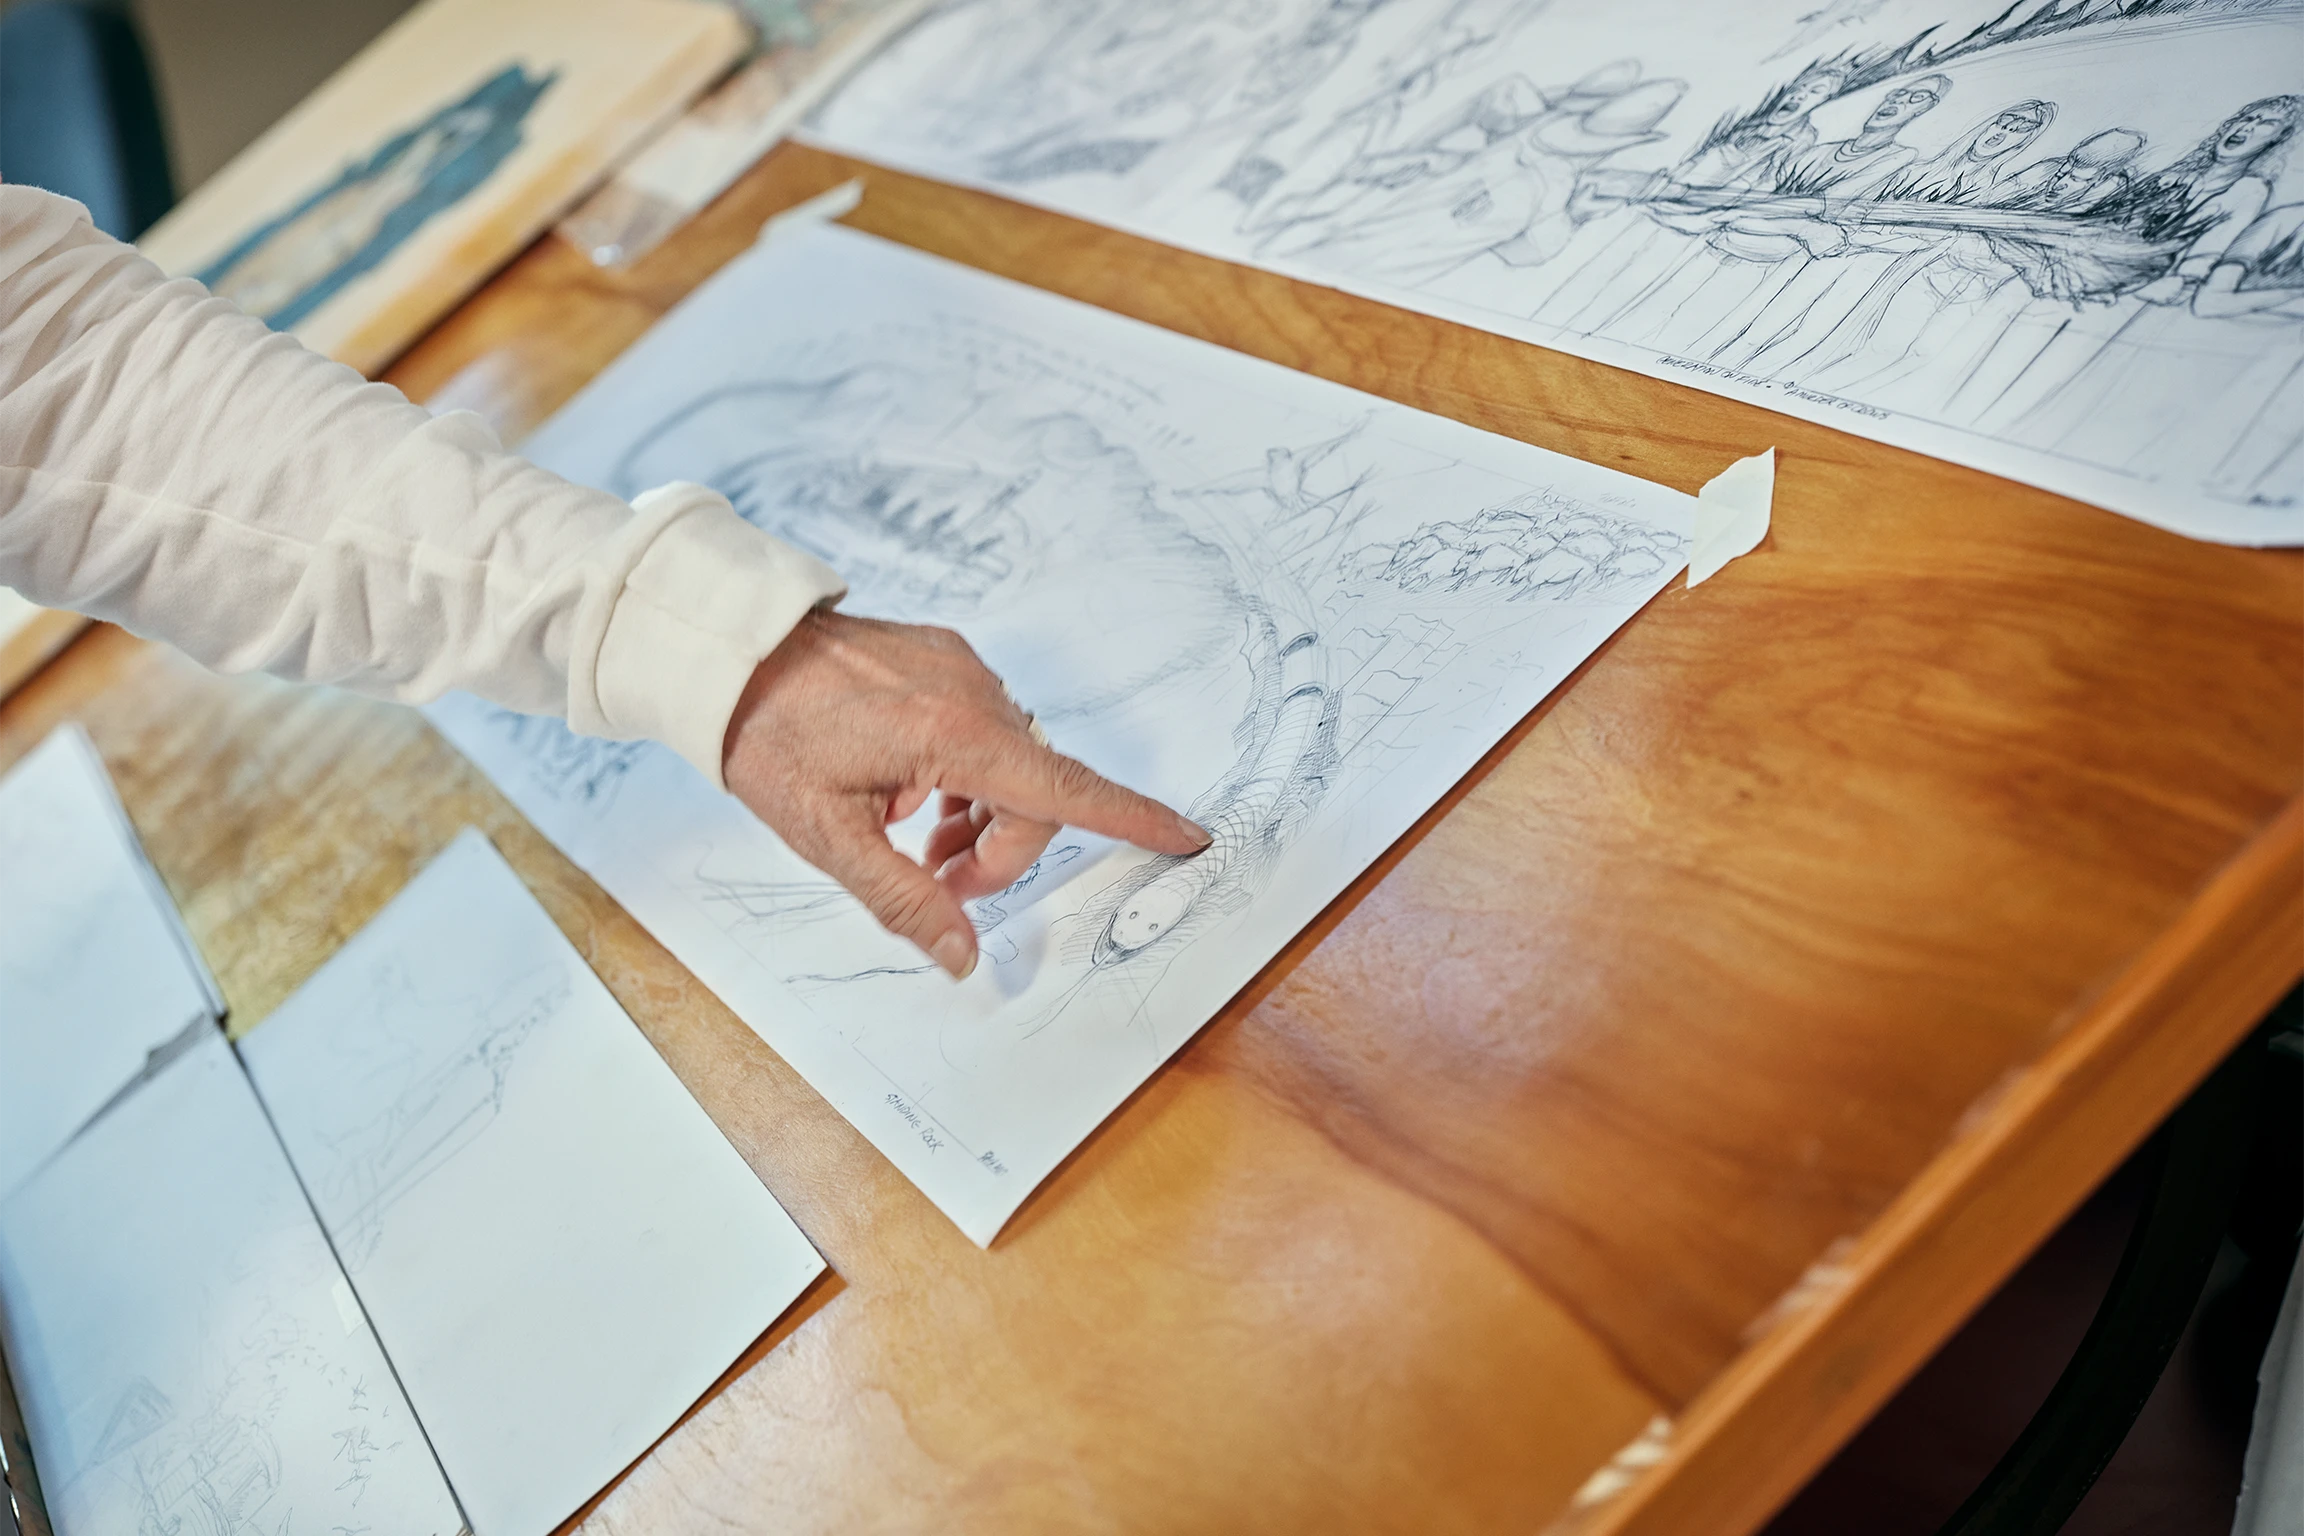 Multiple pieces of paper containing pencil sketches on a wooden table, with the artist Judy Baca's outstretched pointer finger touching one of them